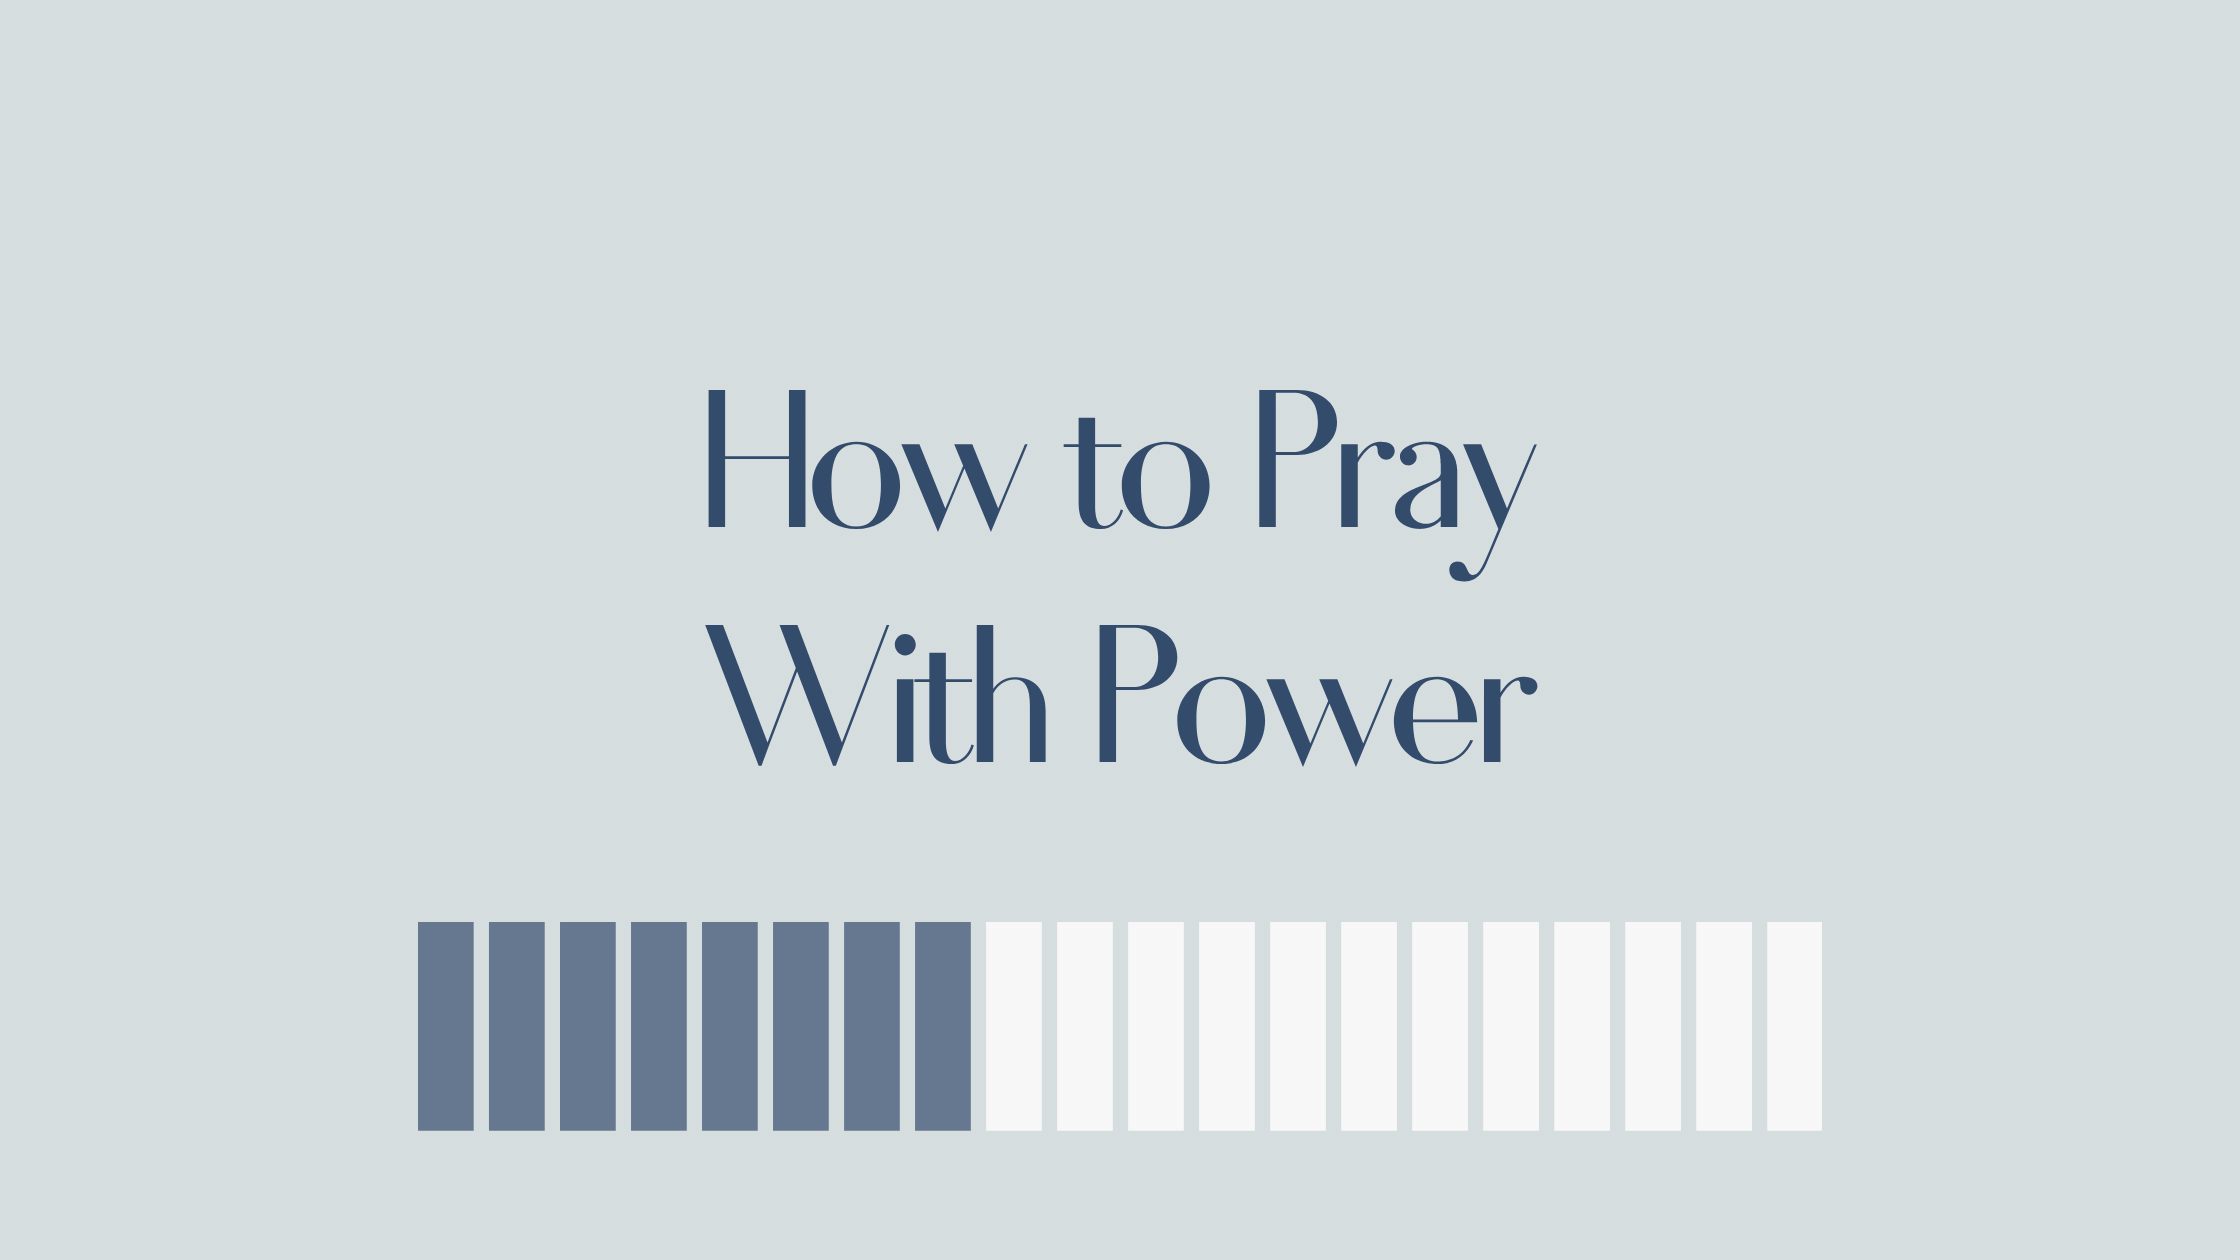 How to Pray With Power